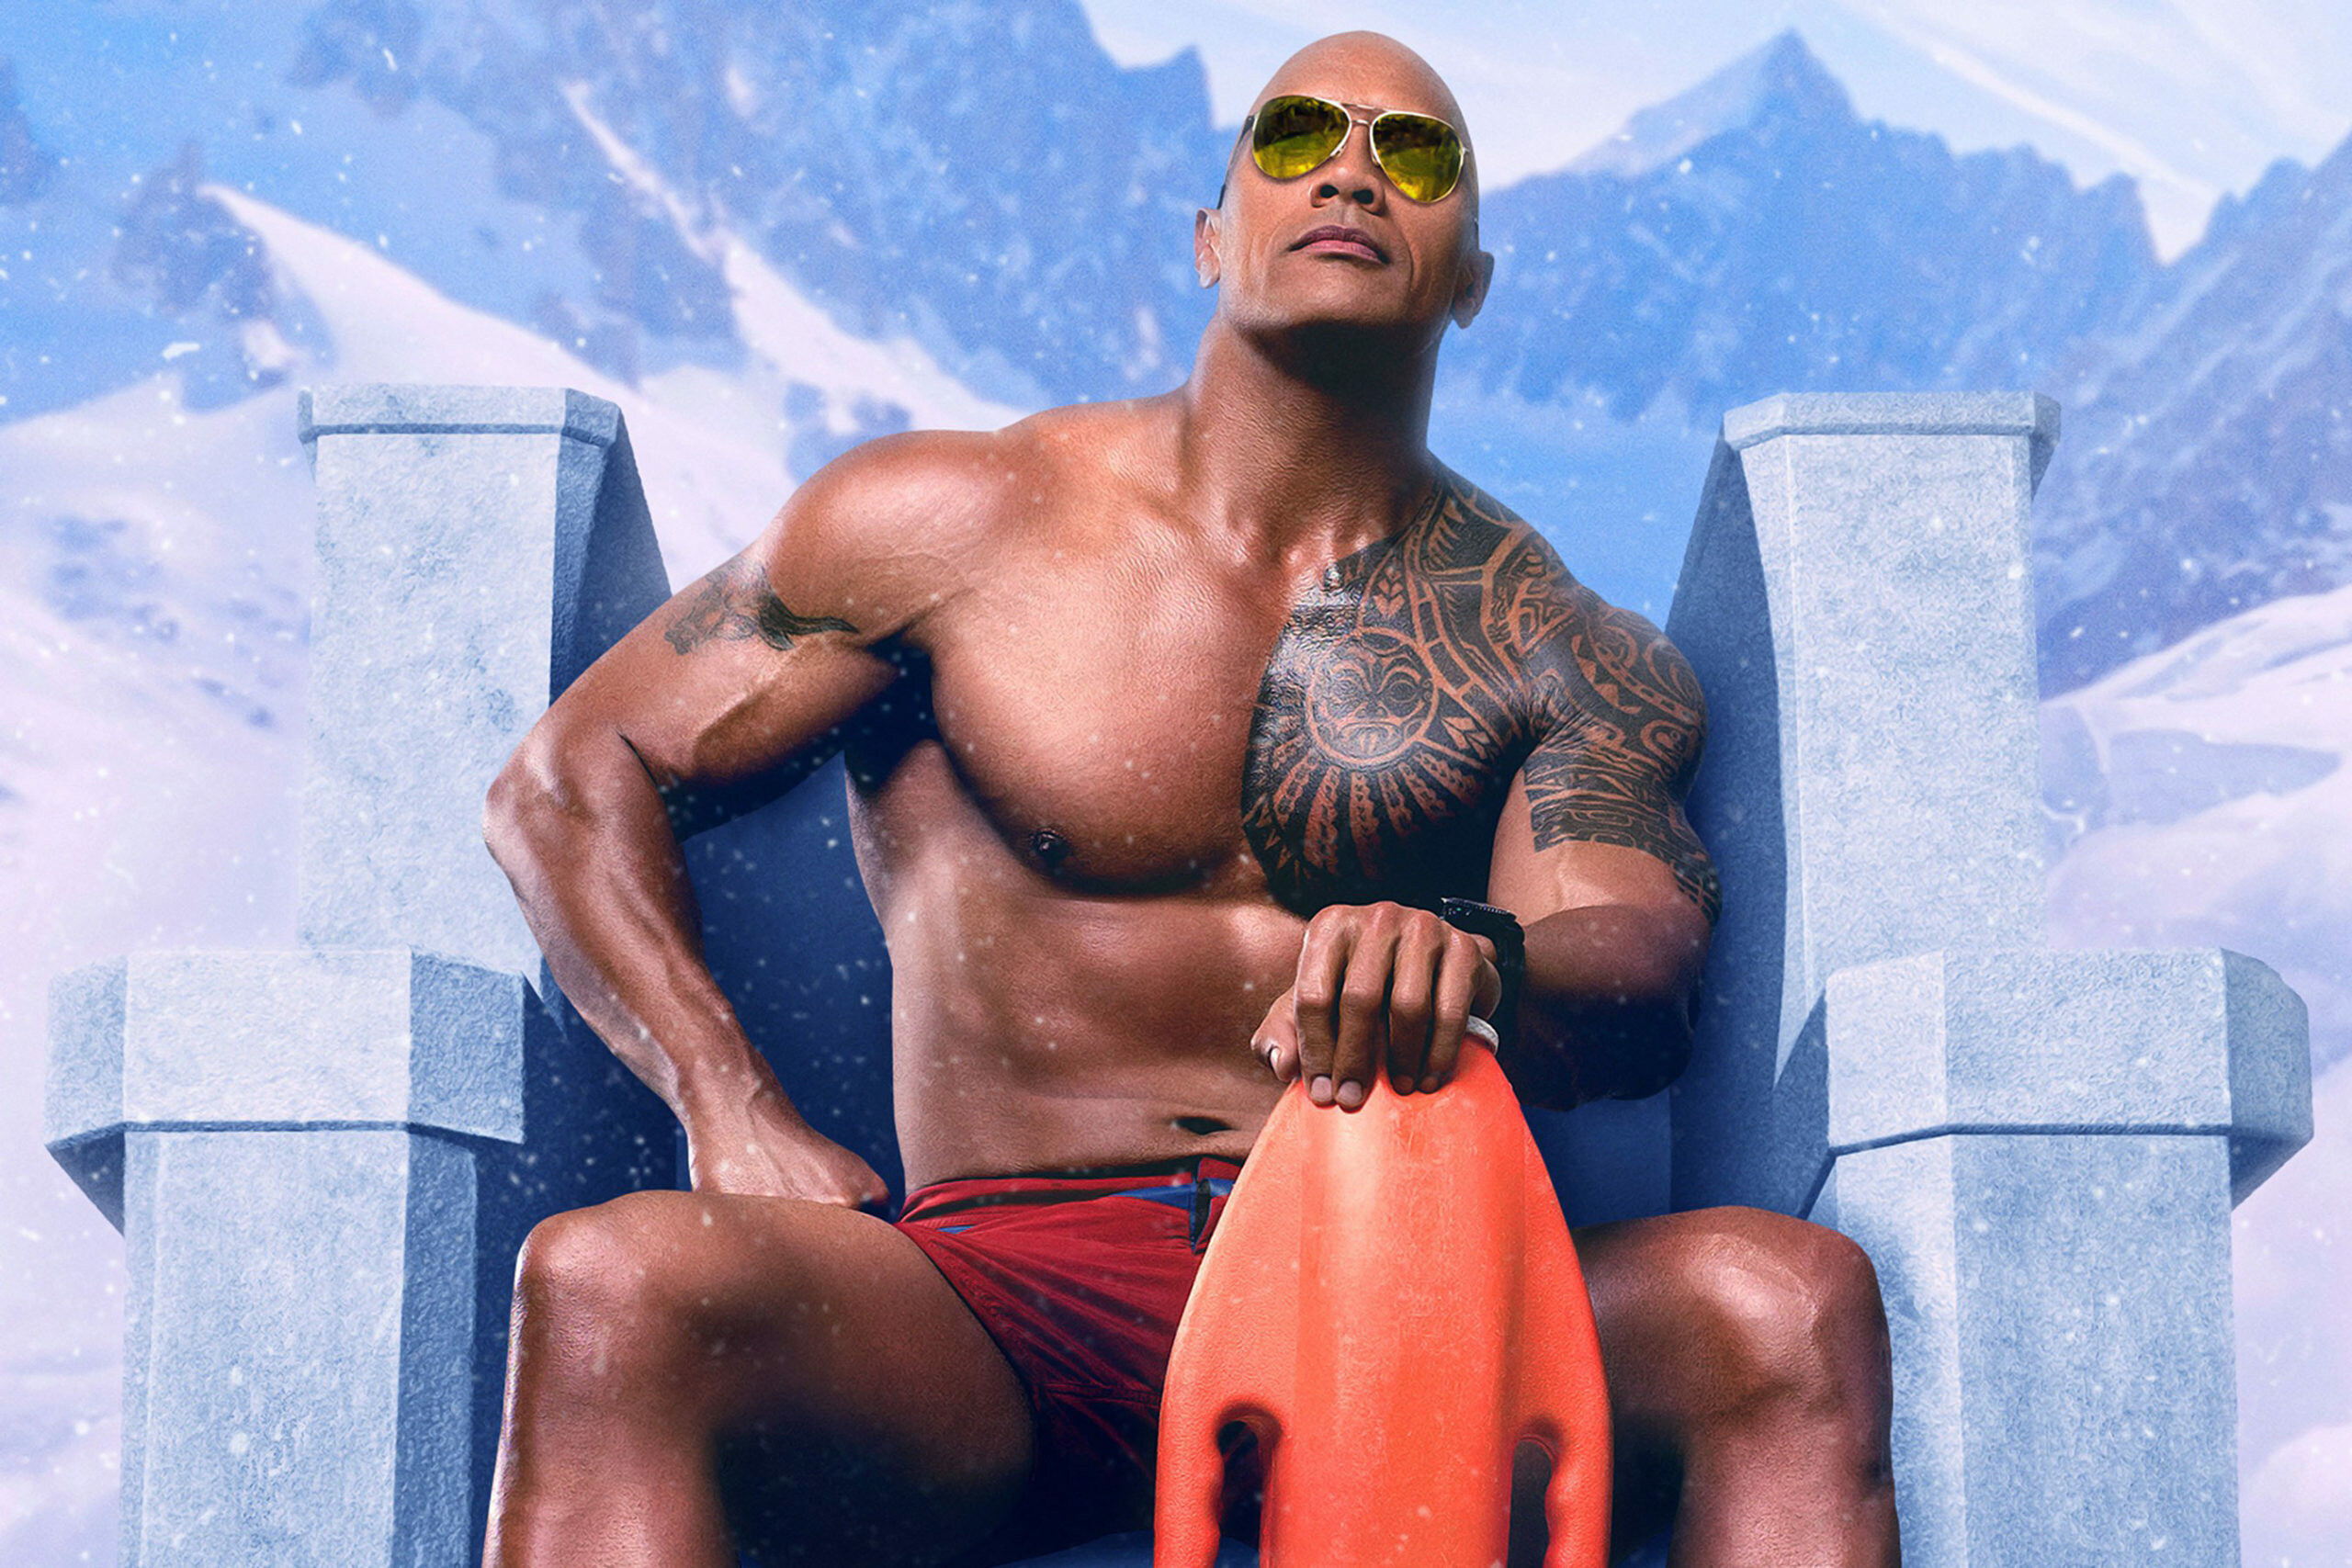 Dwayne Johnson: Appeared as Mitch Buchannon in a 2017 American action comedy film, Baywatch. 2560x1710 HD Wallpaper.